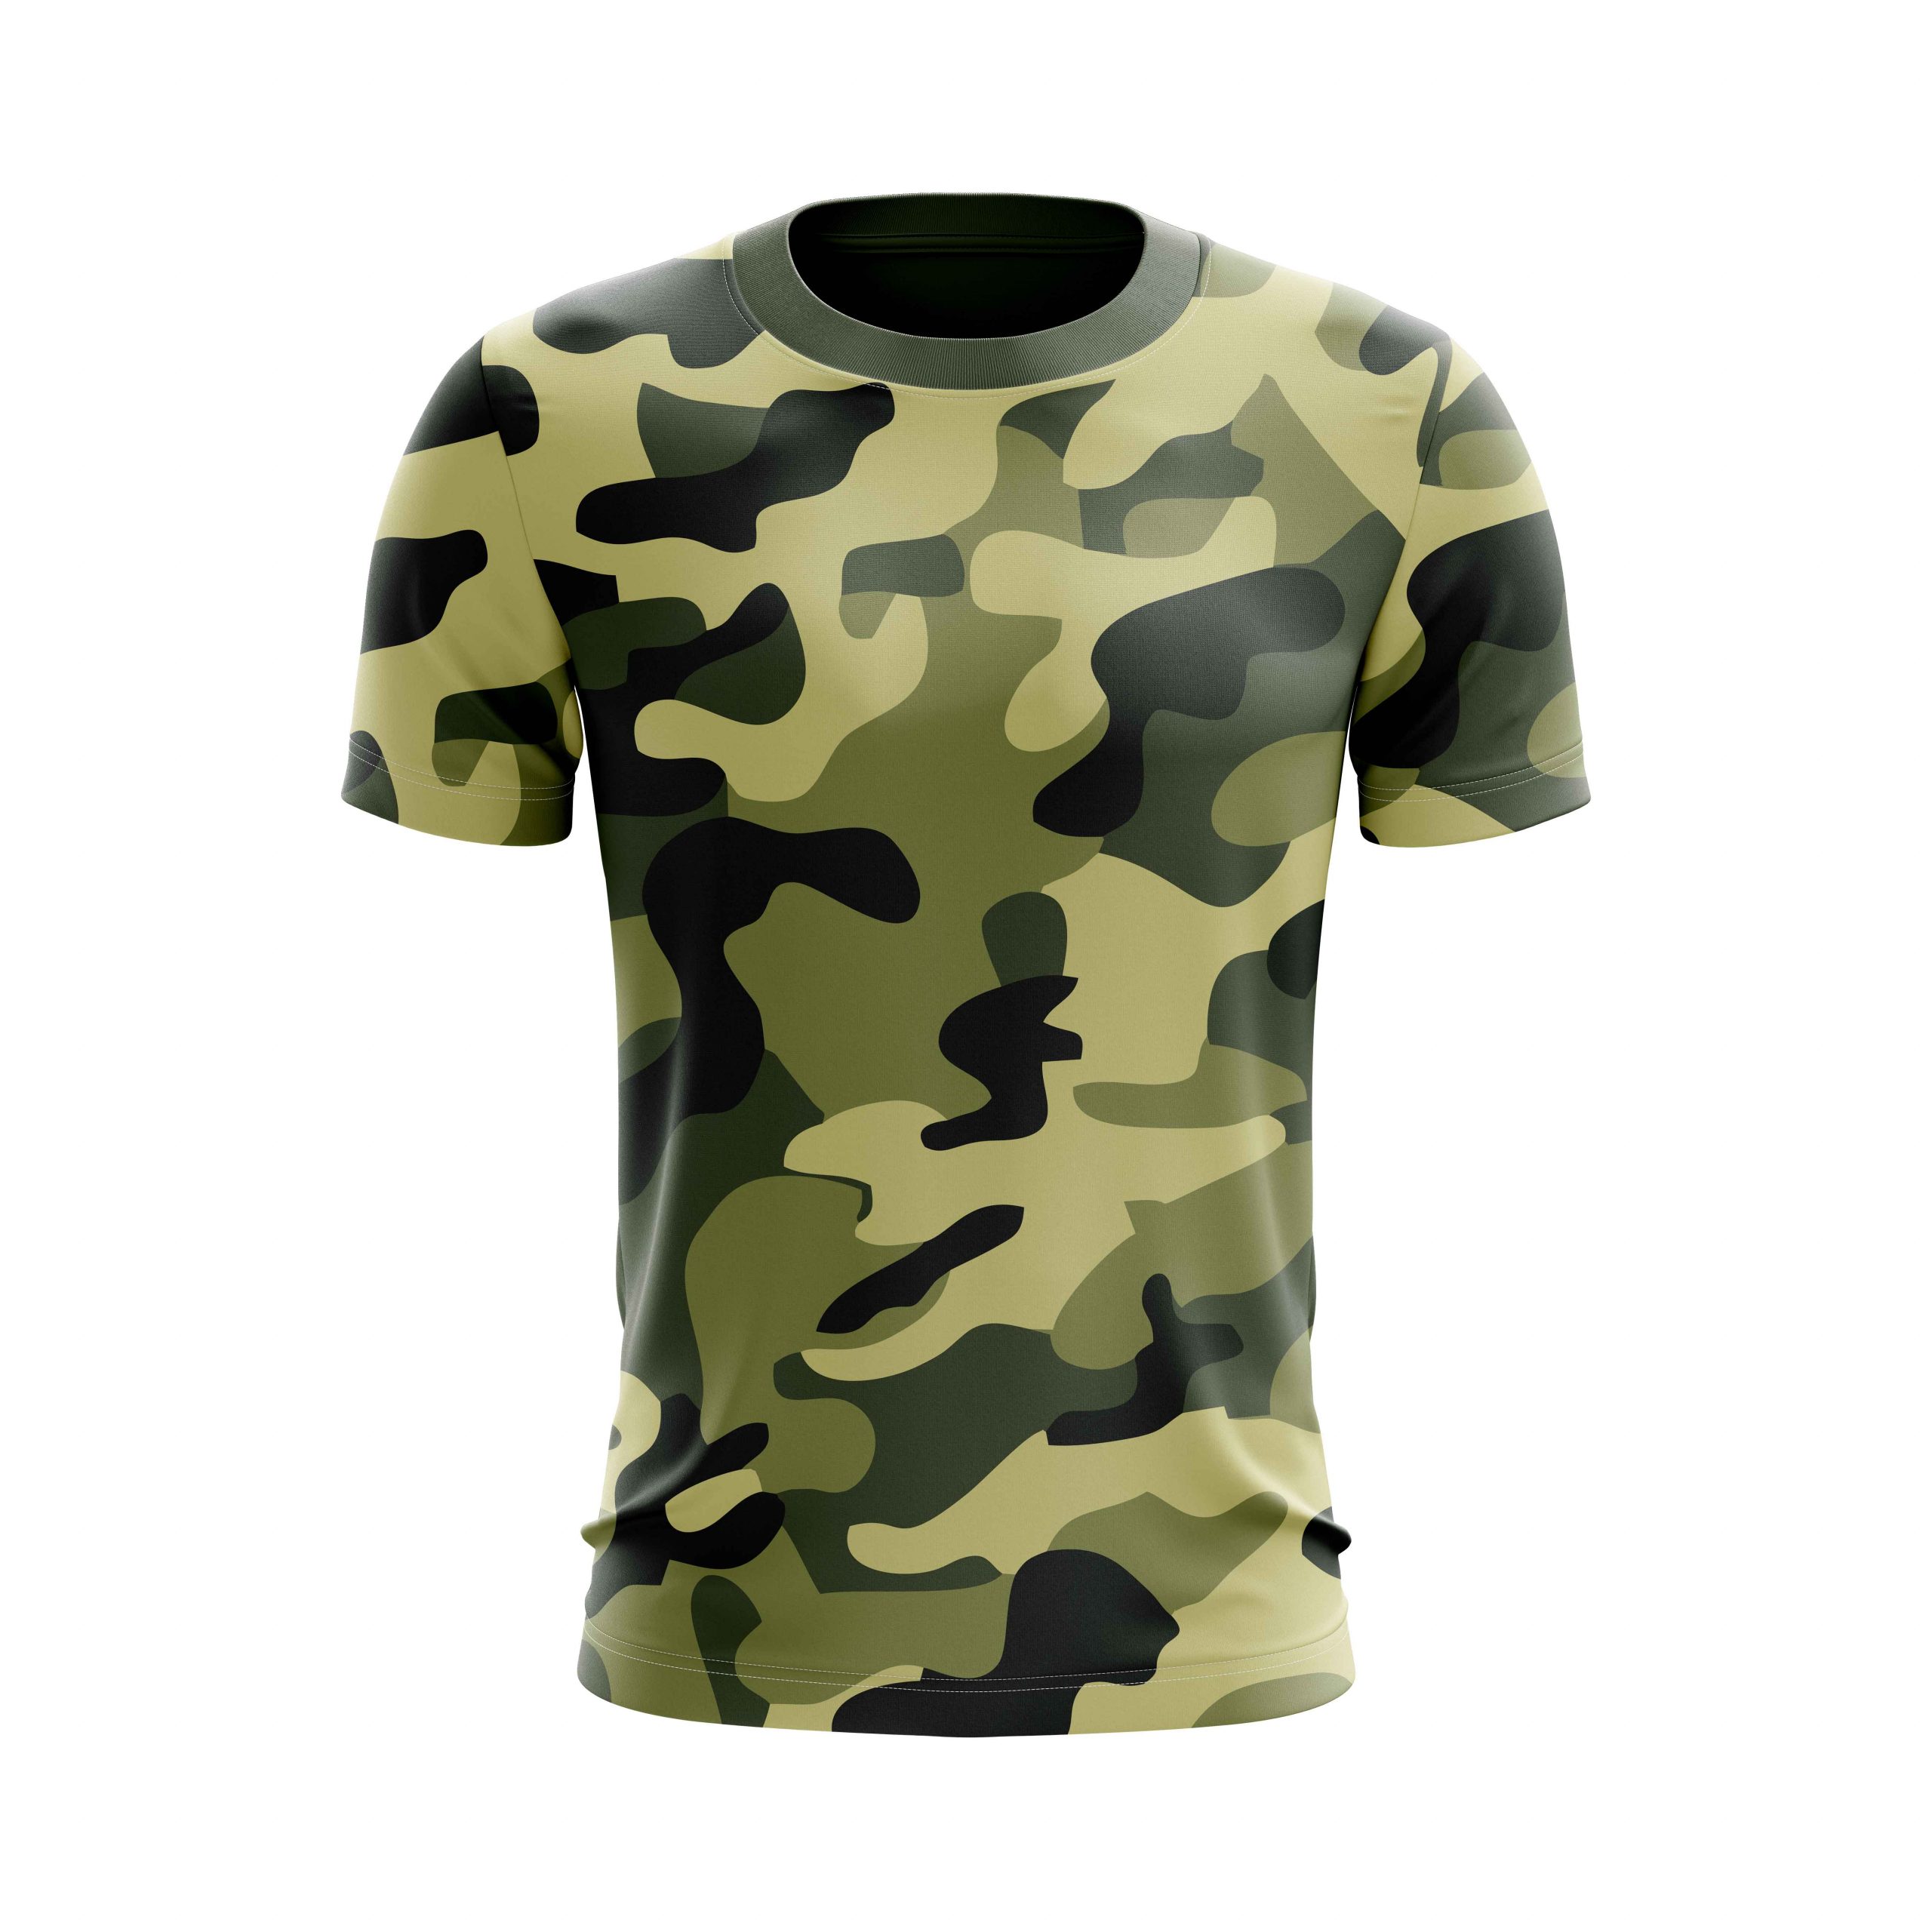 Hyve Green Camo Customized Cricket T shirt for Men - Front